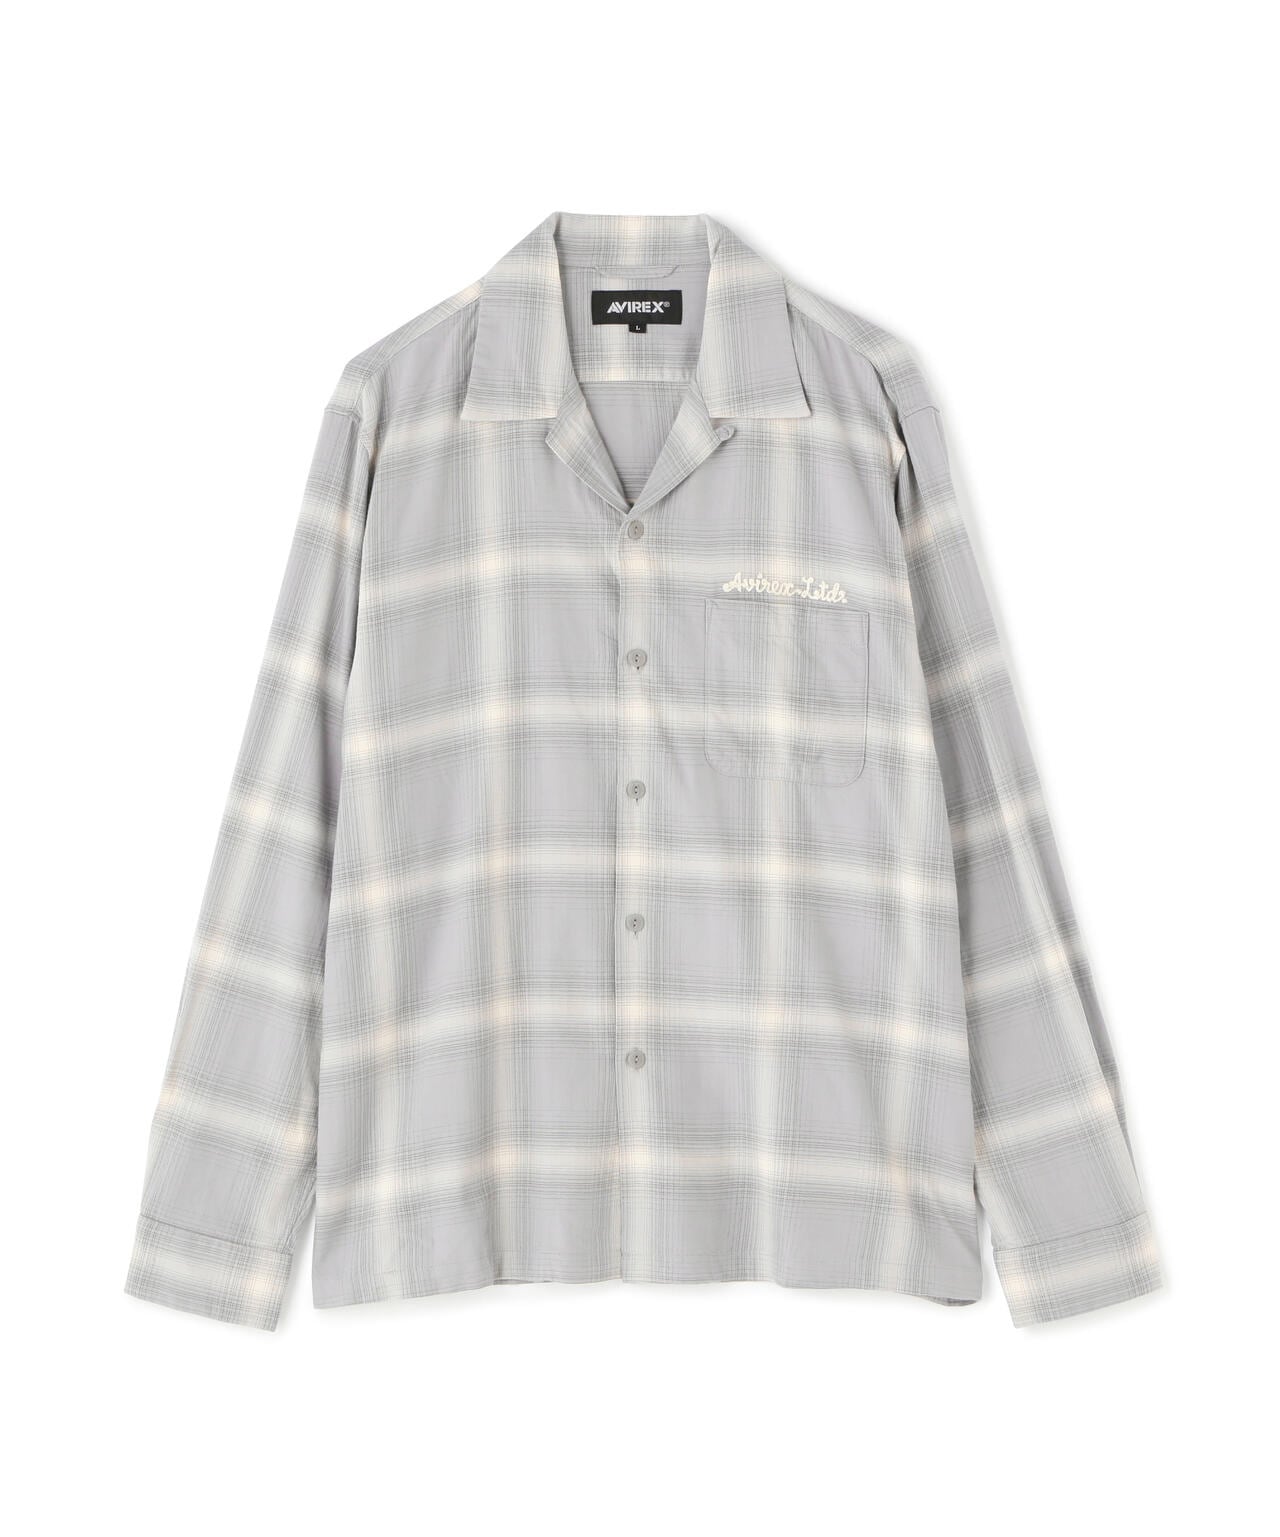 L/S C/L OMBRE SHIRT A/DINER / 長袖 コットンリネン オンブレー